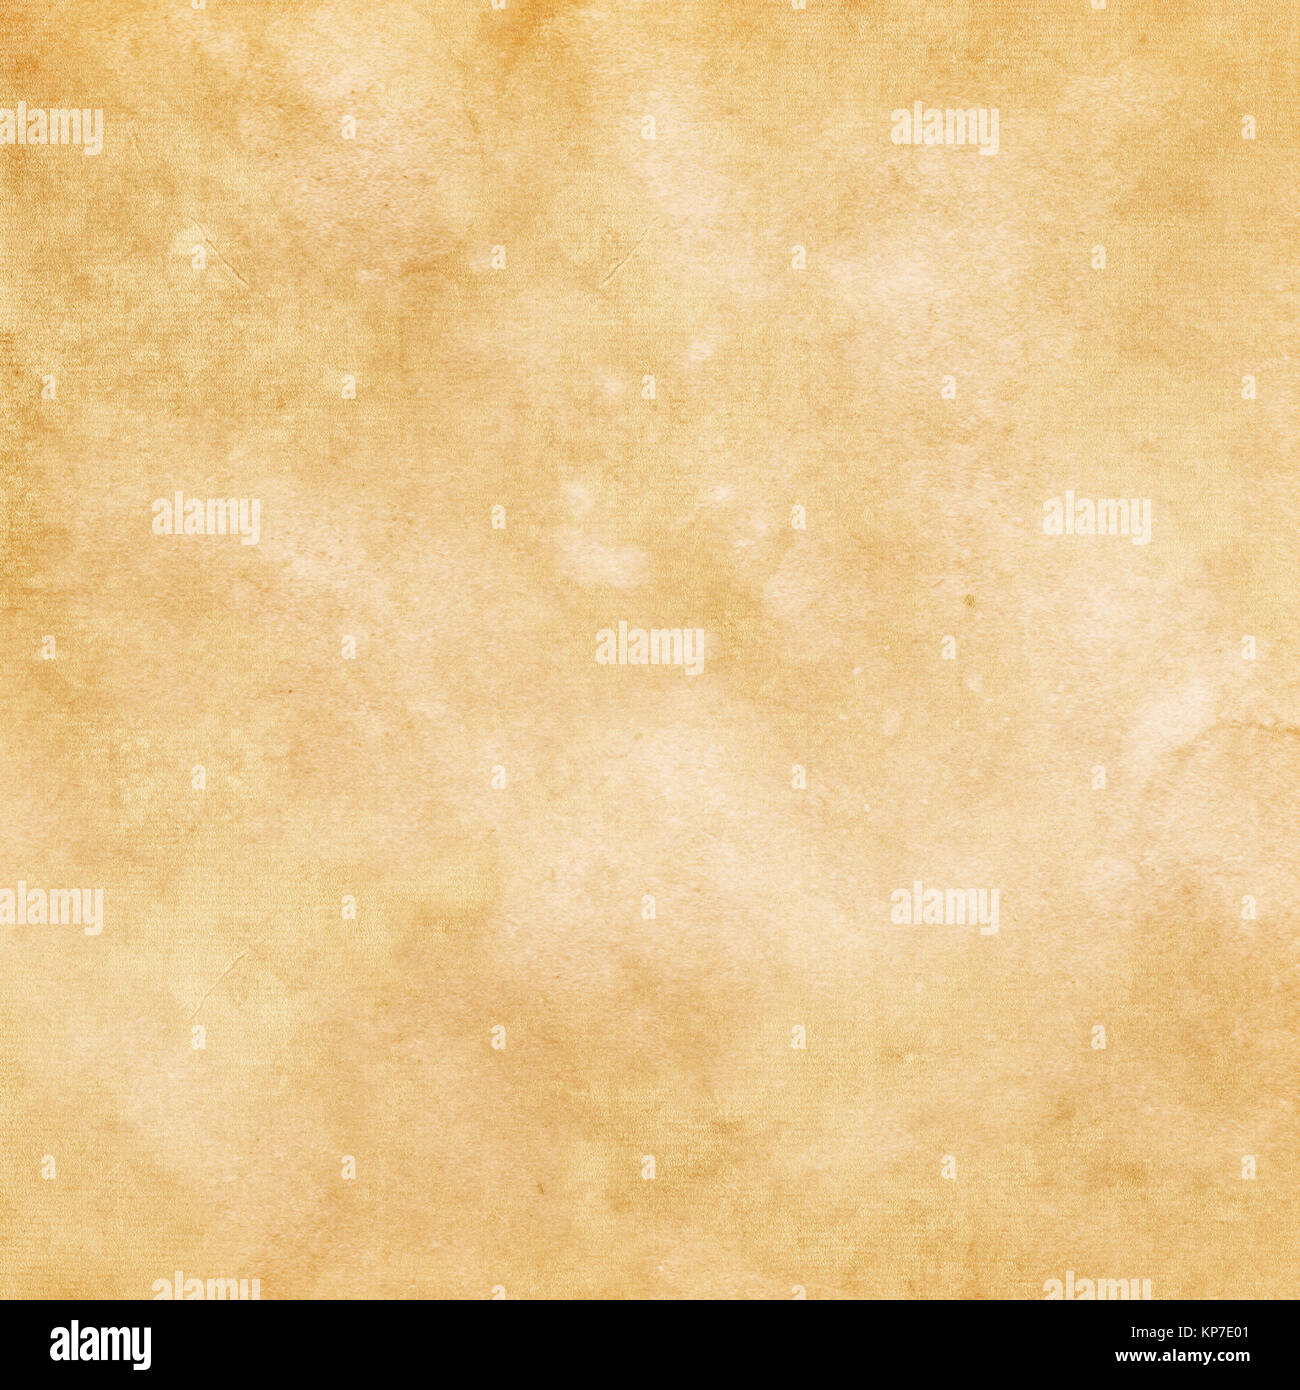 Old grunge parchment backround. Natural material for the design. Stock Photo